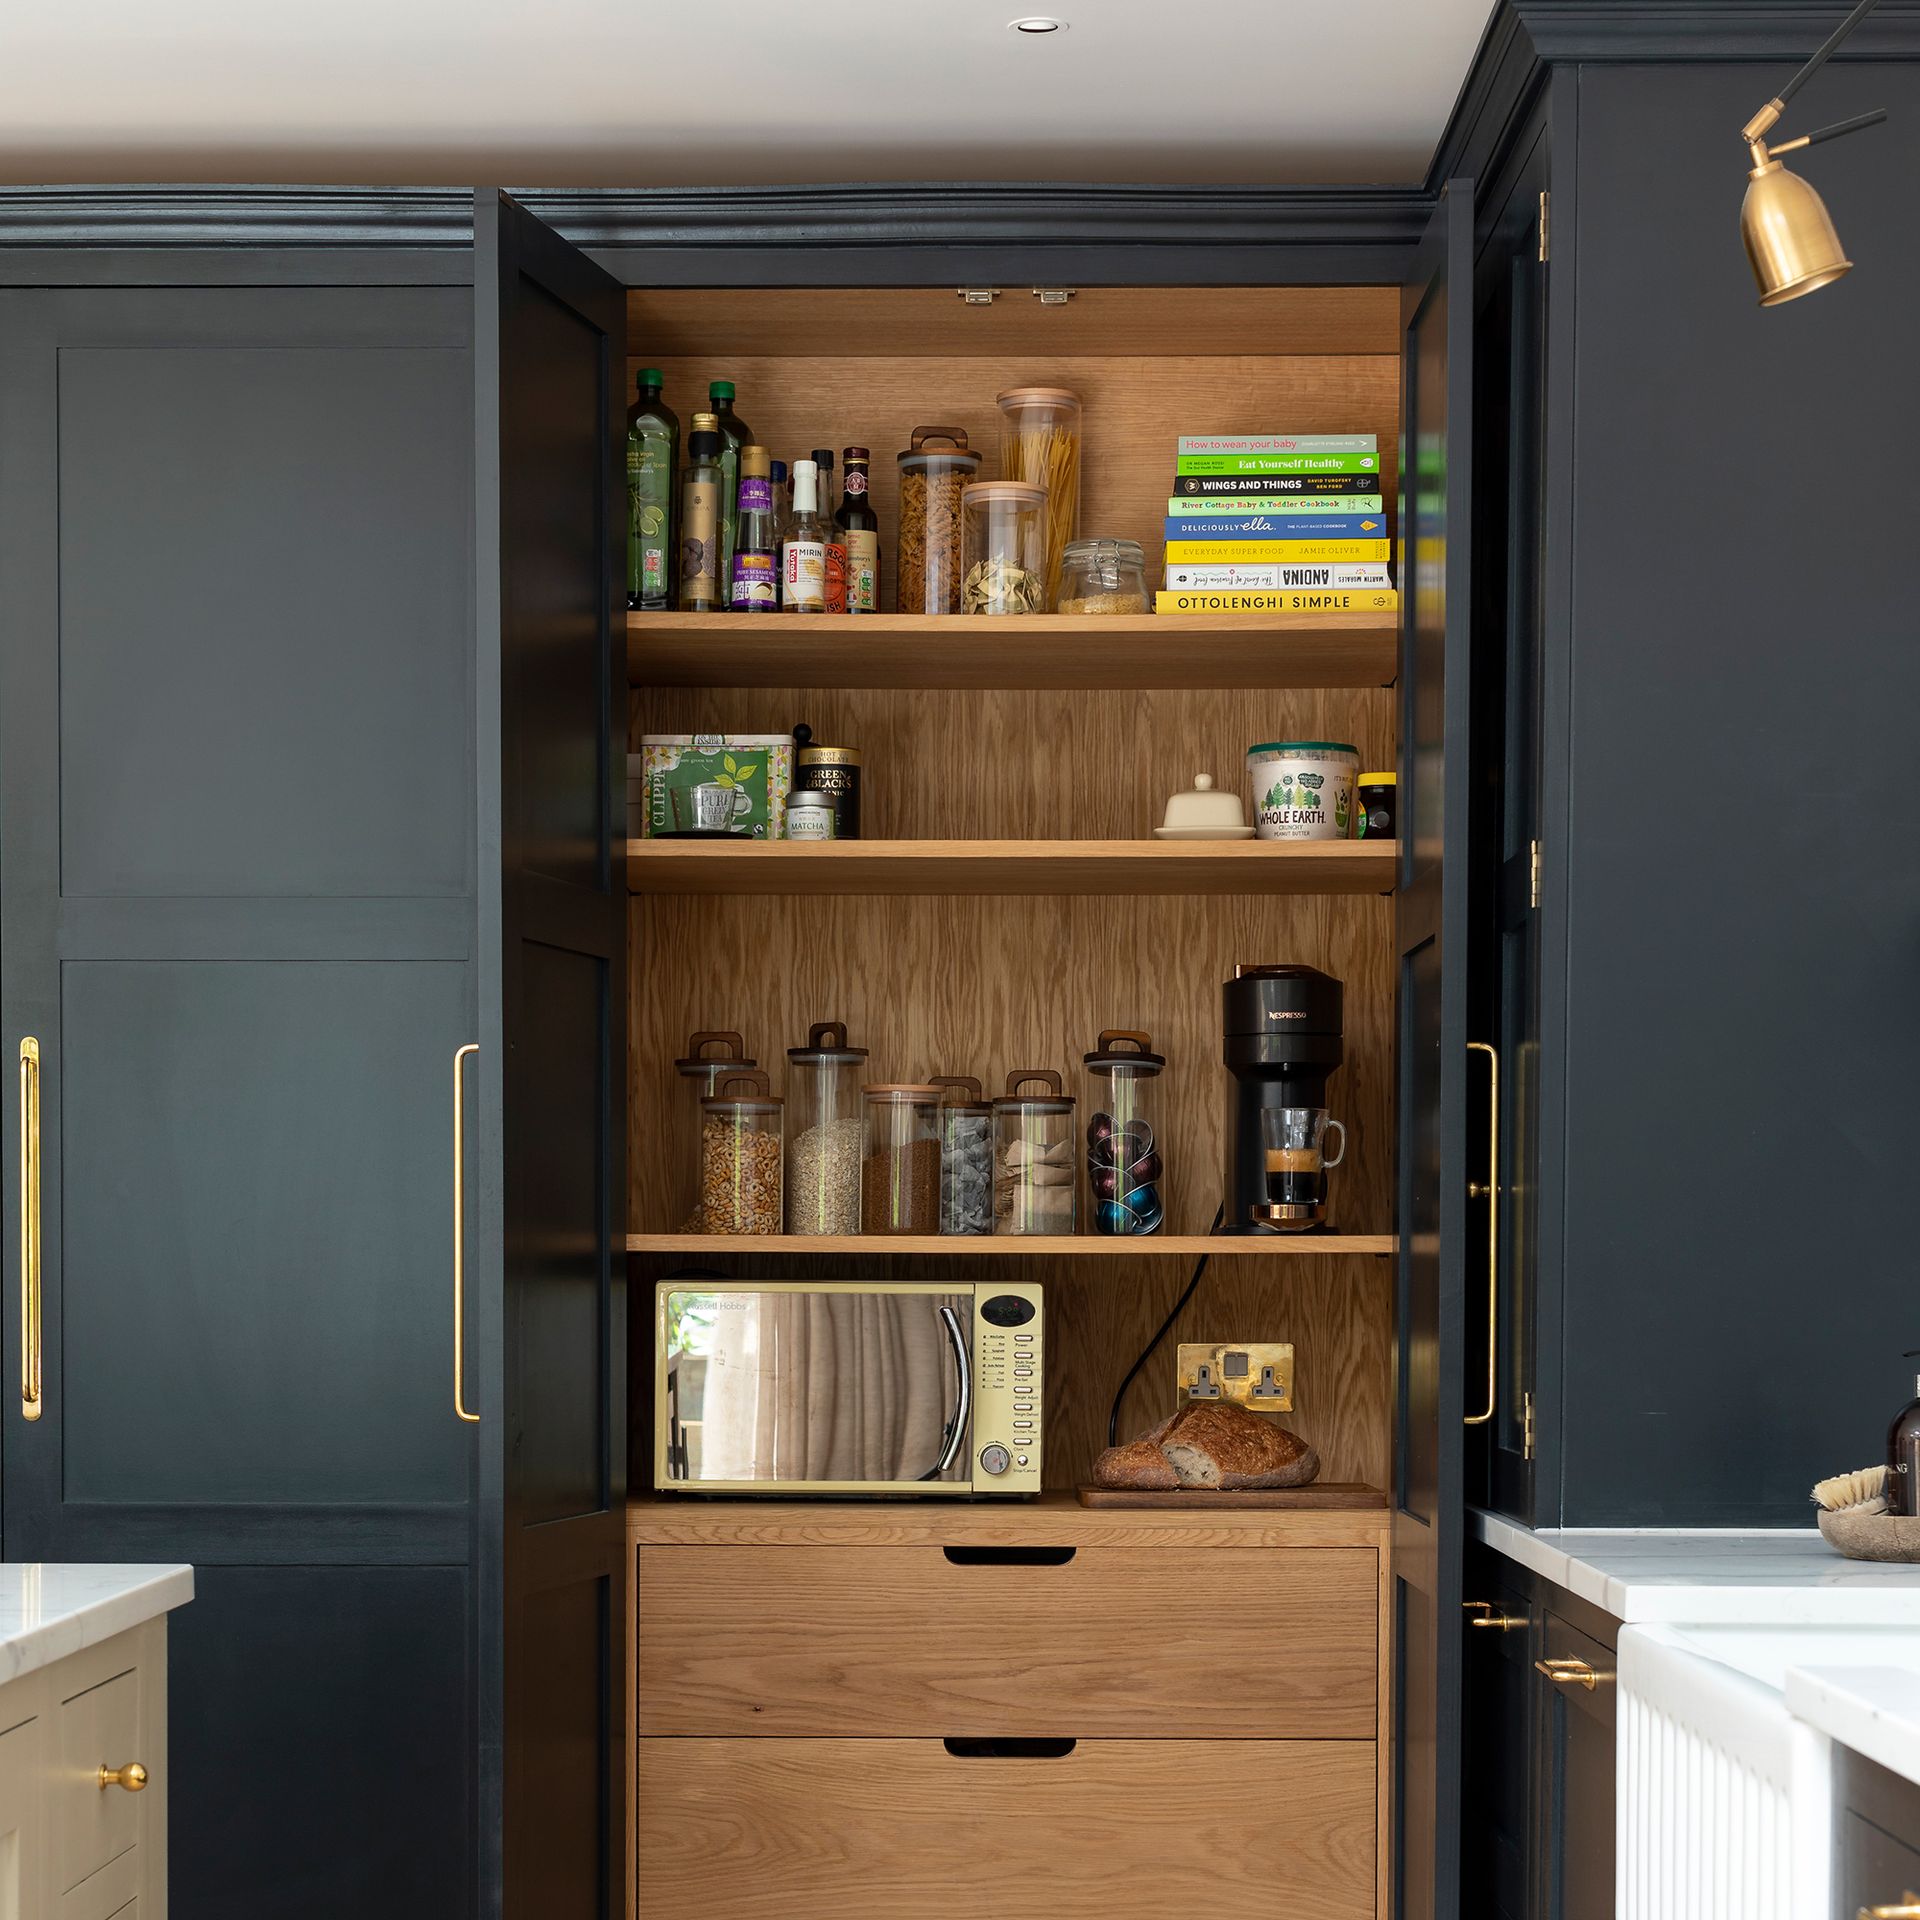 Clever small kitchen layouts to maximize tiny spaces | Ideal Home